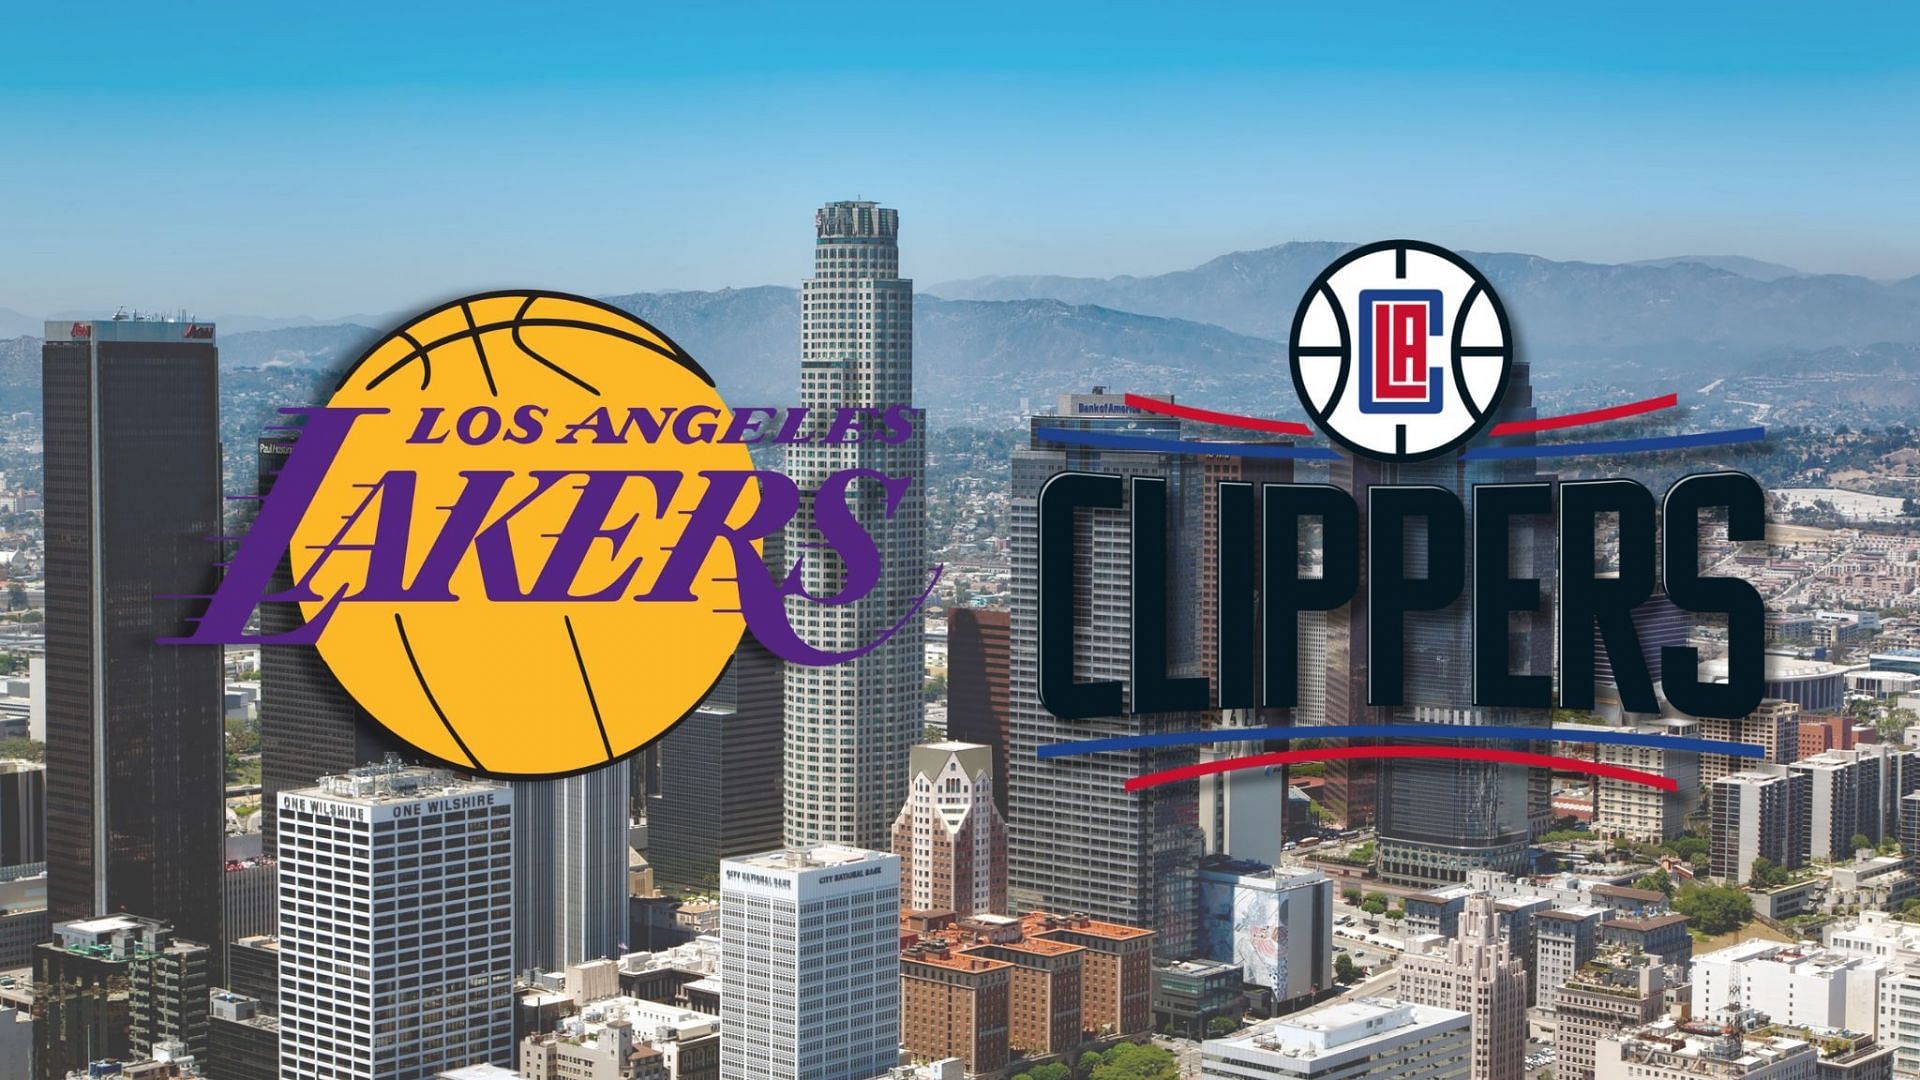 Los Angeles has two NBA teams: the Lakers and the Clippers